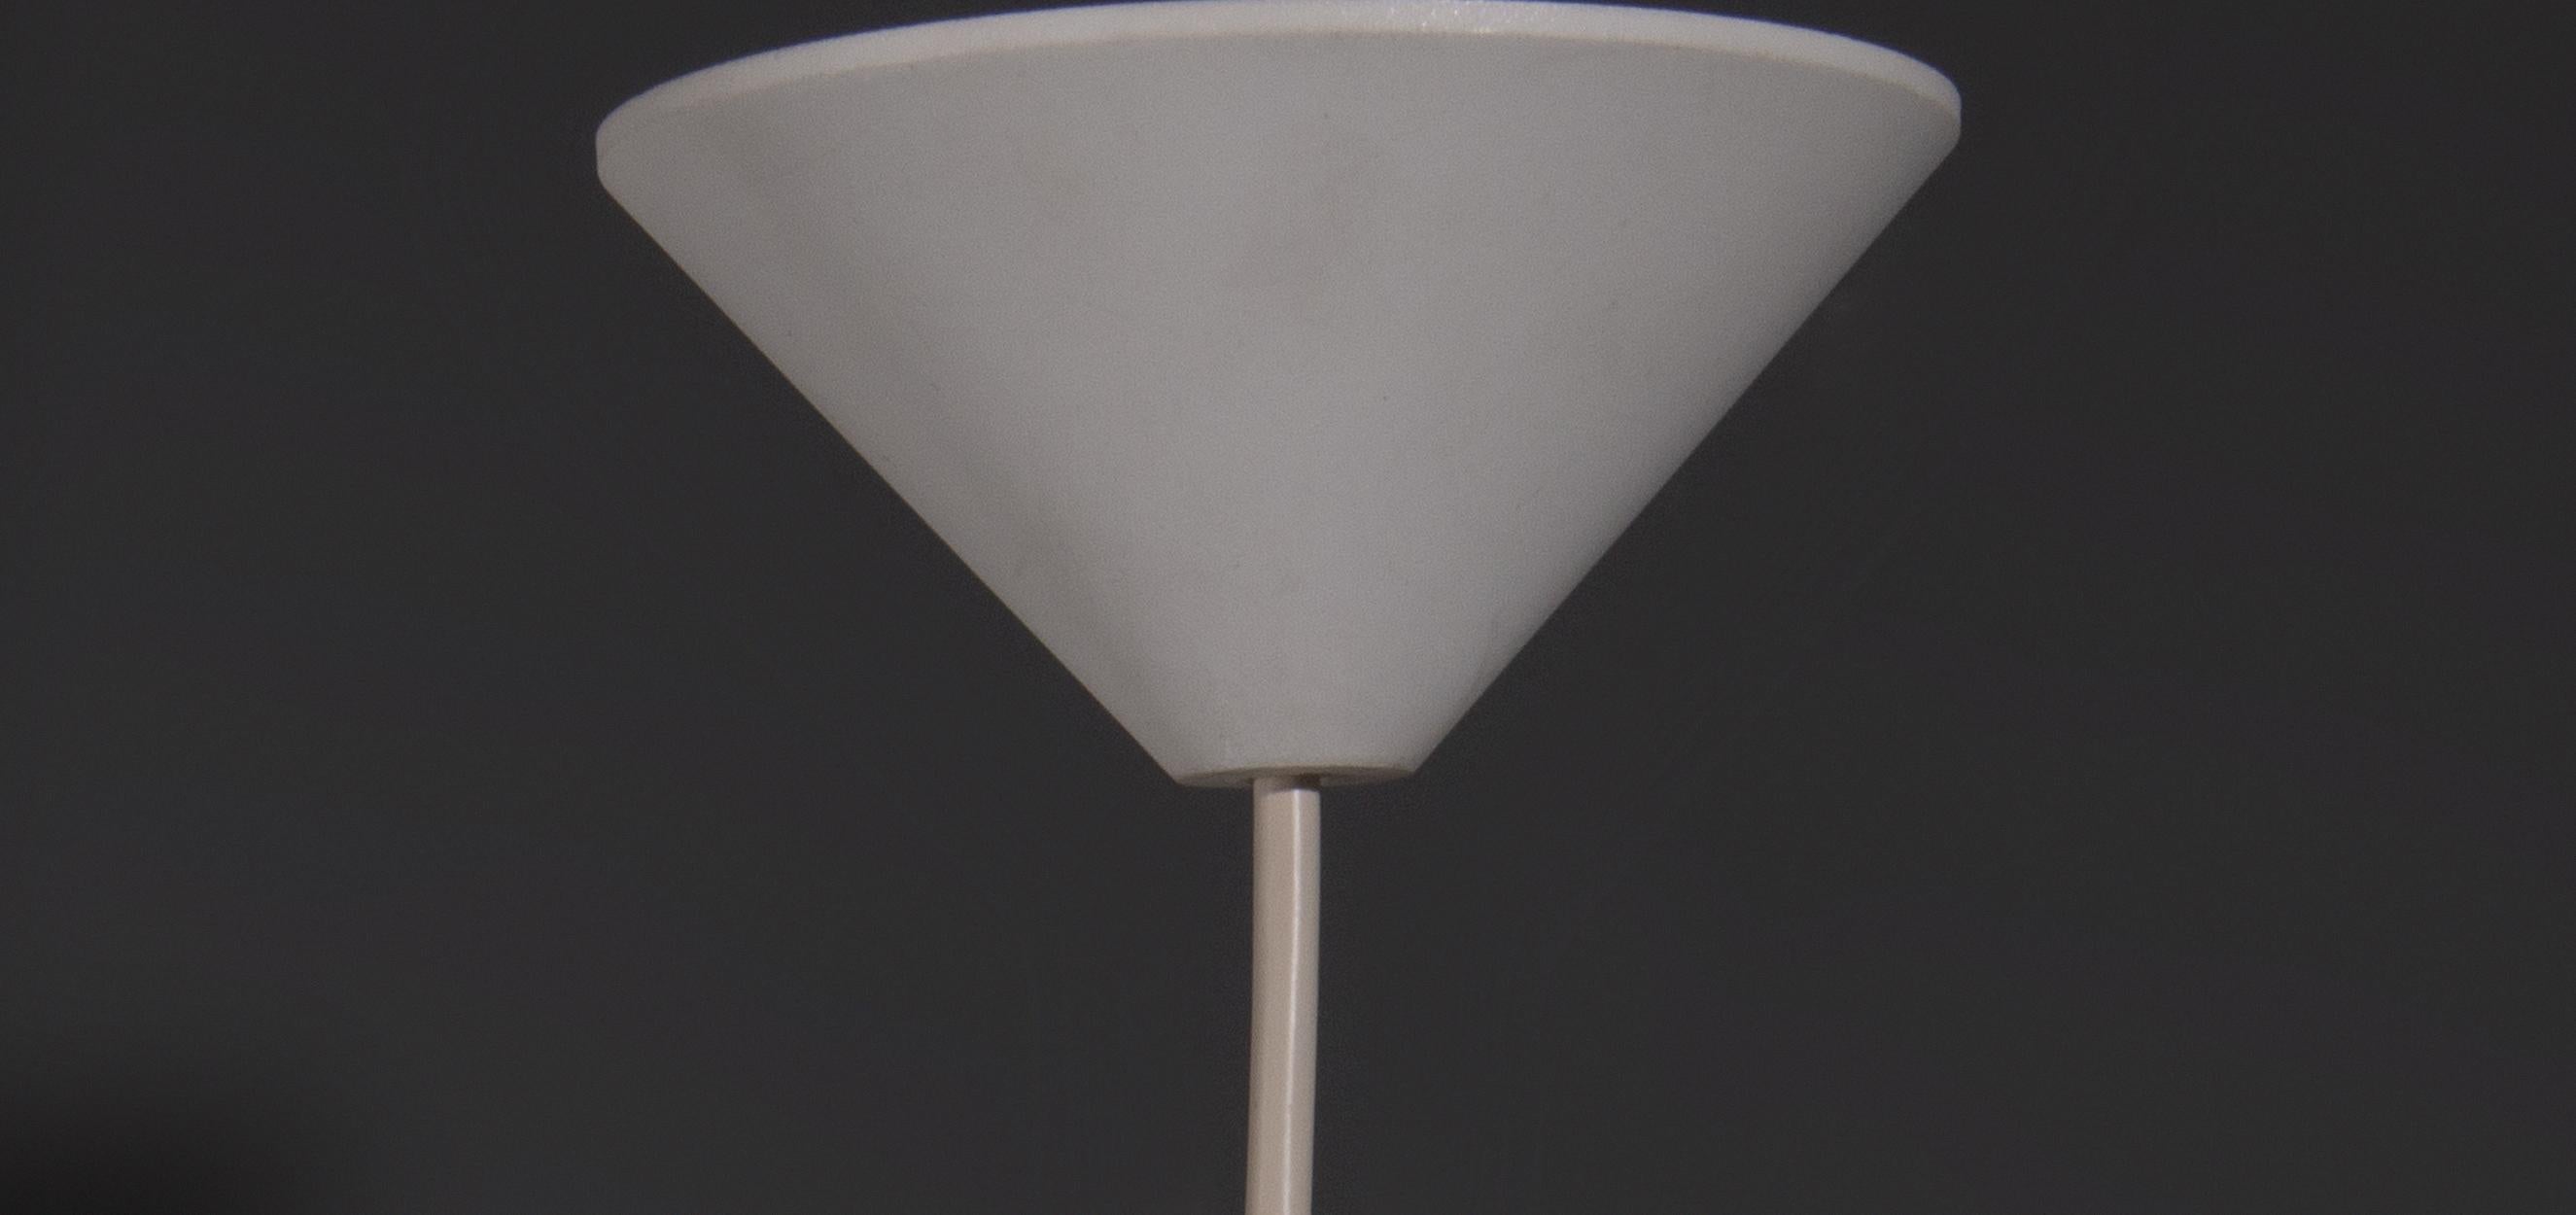 Sky Flyer Pendant by Yki Nummi Made of White Acrylic, Designed in 1959 Finland 1